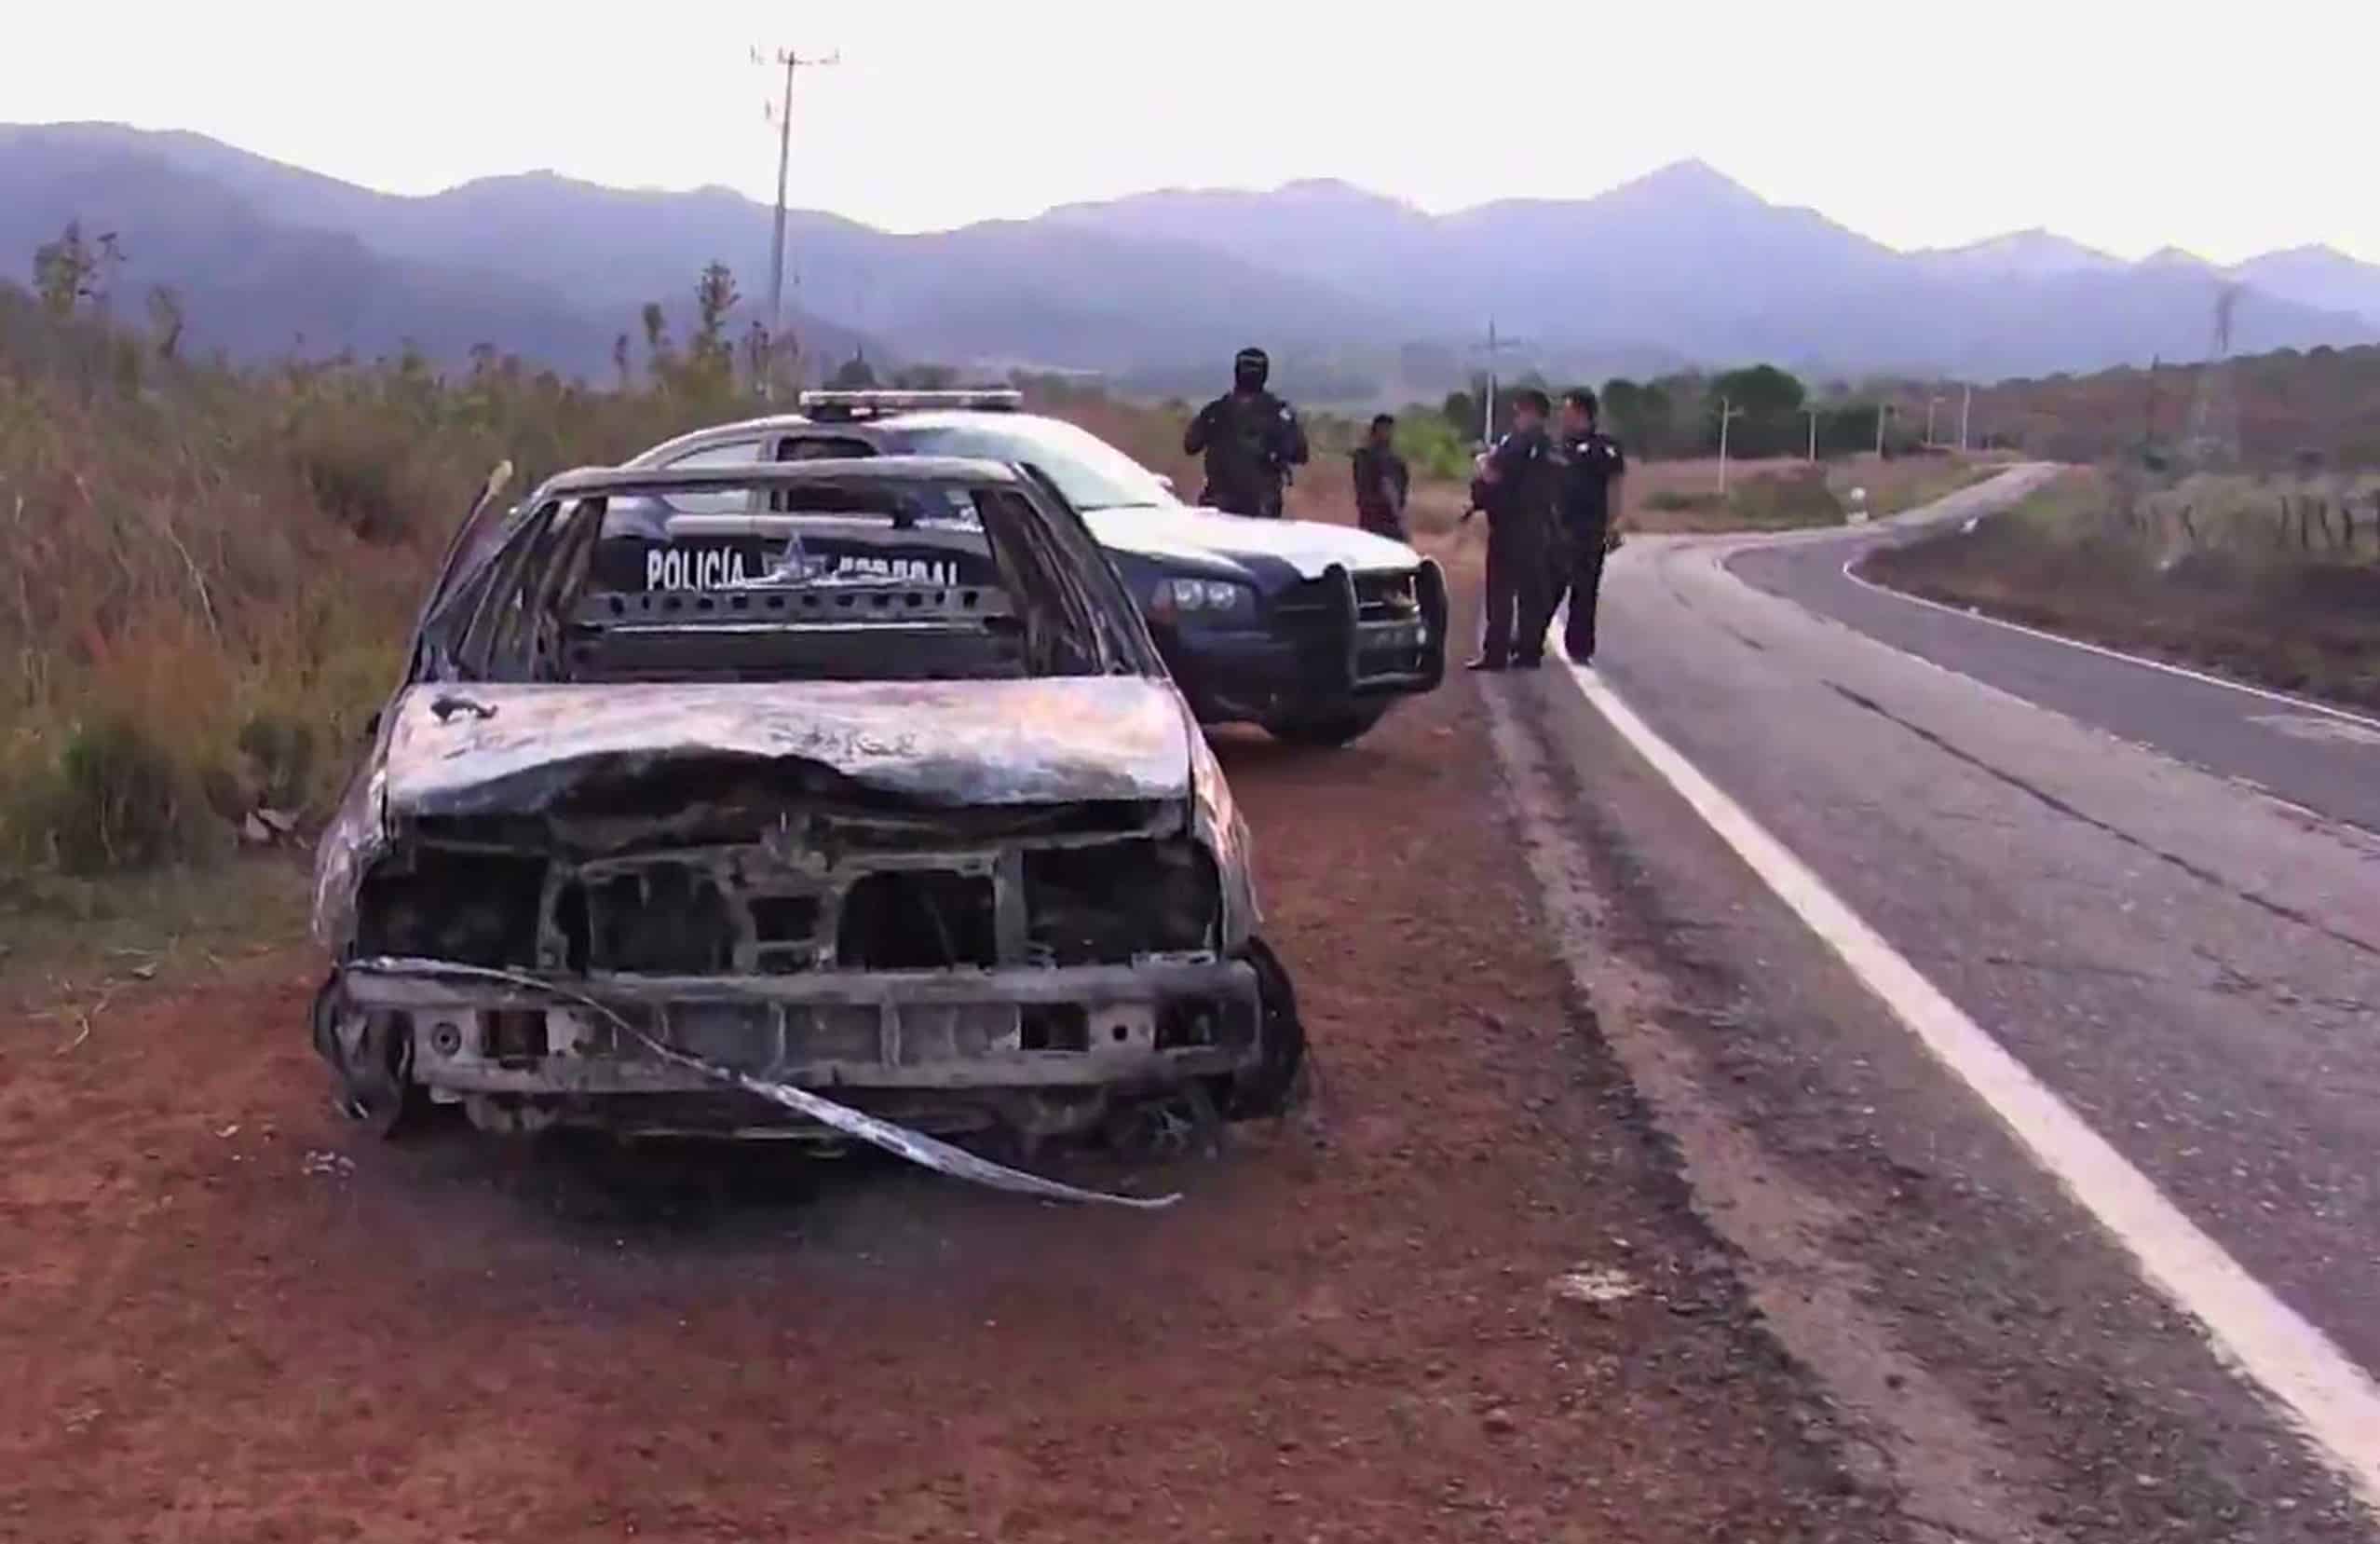 Grab taken from a video of policemen inspecting a burnt police vehicle on April 7, 2015 on a Jalisco state road, Mexico, where at least 15 police officers were killed in an ambush carried out by a gang called 